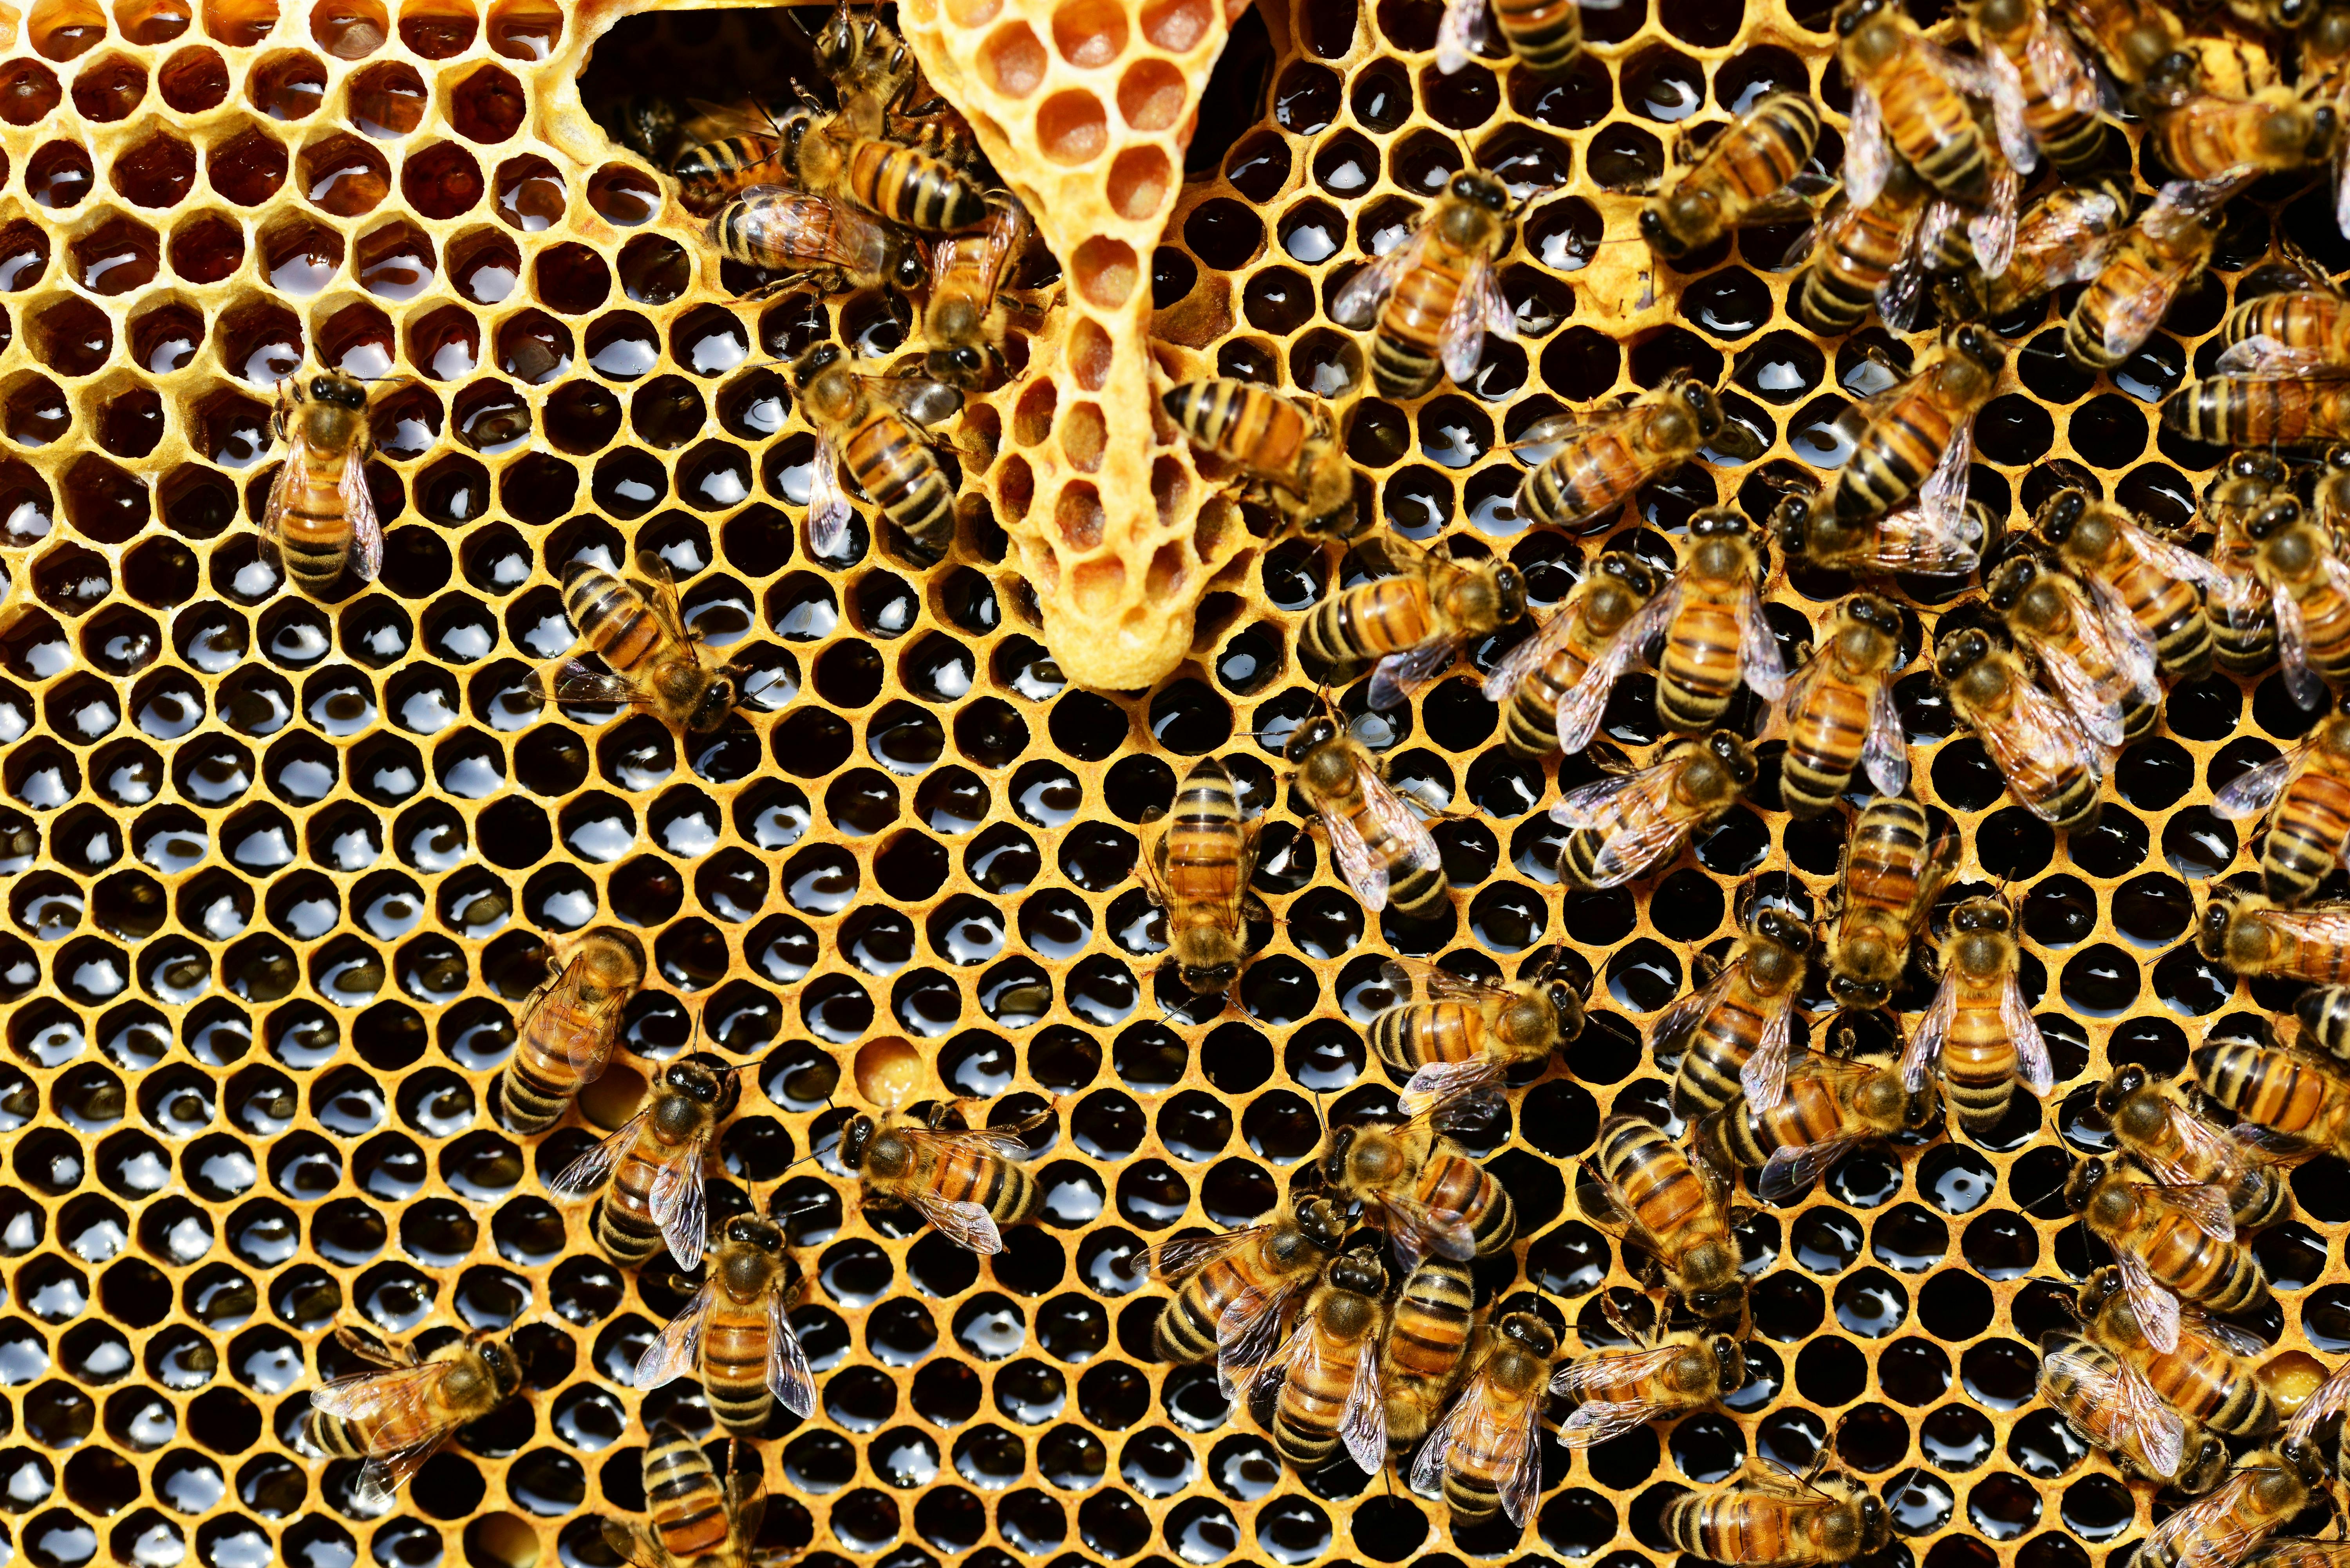 Honeycomb Photos, Download The BEST Free Honeycomb Stock Photos & HD Images